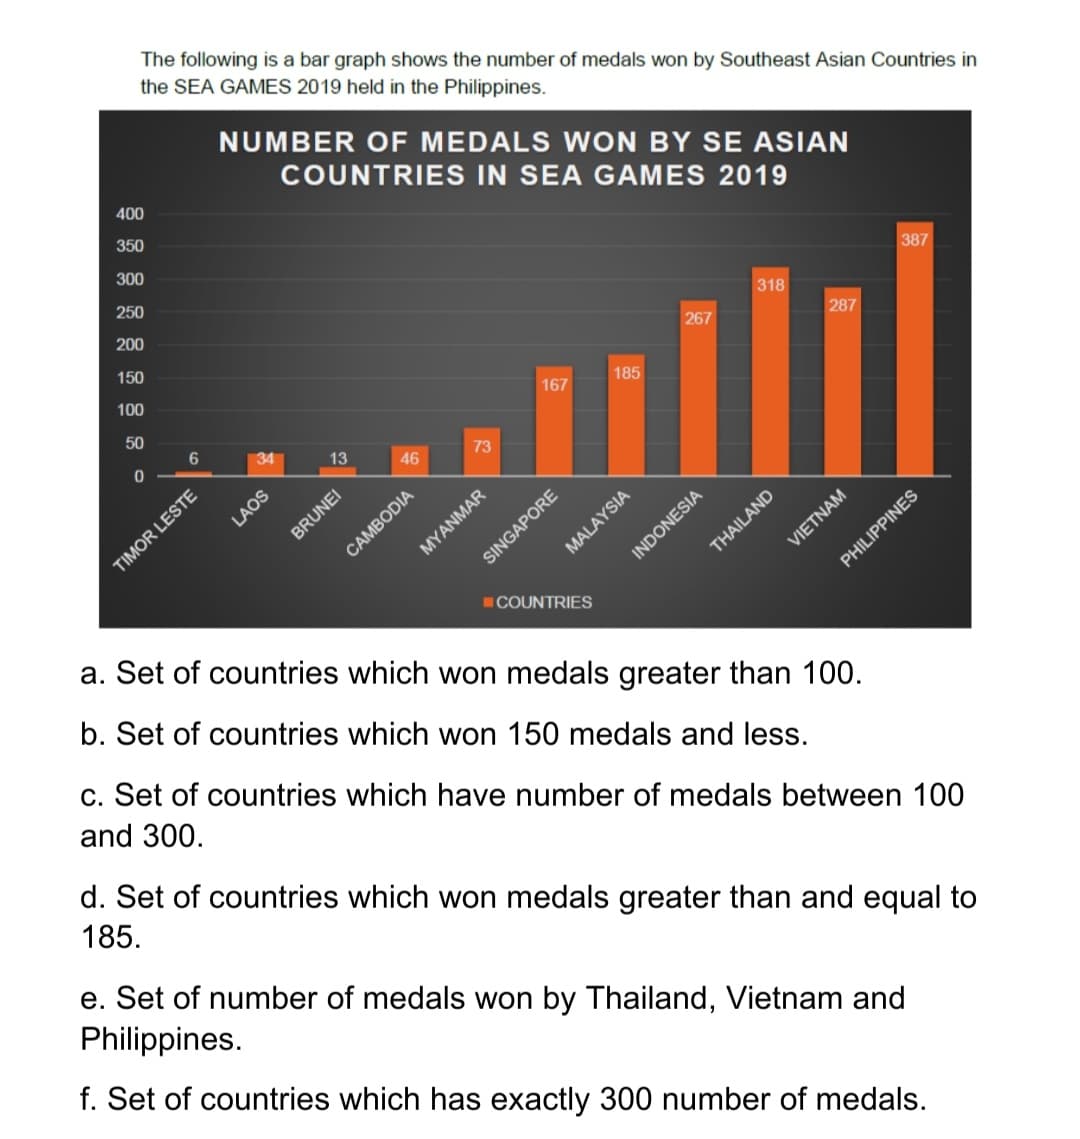 The following is a bar graph shows the number of medals won by Southeast Asian Countries in
the SEA GAMES 2019 held in the Philippines.
NUMBER OF MEDALS WON BY SE ASIAN
COUNTRIES IN SEA GAMES 2019
400
350
300
250
200
387
150
318
100
267
287
50
167
185
34
13
46
73
LAOS
CAMBODIA
MYANMAR
SINGAPORE
MALAYSIA
INDONESIA
VIETNAM
COUNTRIES
a. Set of countries which won medals greater than 100.
PHILIPPINES
b. Set of countries which won 150 medals and less.
c. Set of countries which have number of medals between 100
and 300.
d. Set of countries which won medals greater than and equal to
185.
e. Set of number of medals won by Thailand, Vietnam and
Philippines.
f. Set of countries which has exactly 300 number of medals.
TIMOR LESTE
BRUNEI
THAILAND
